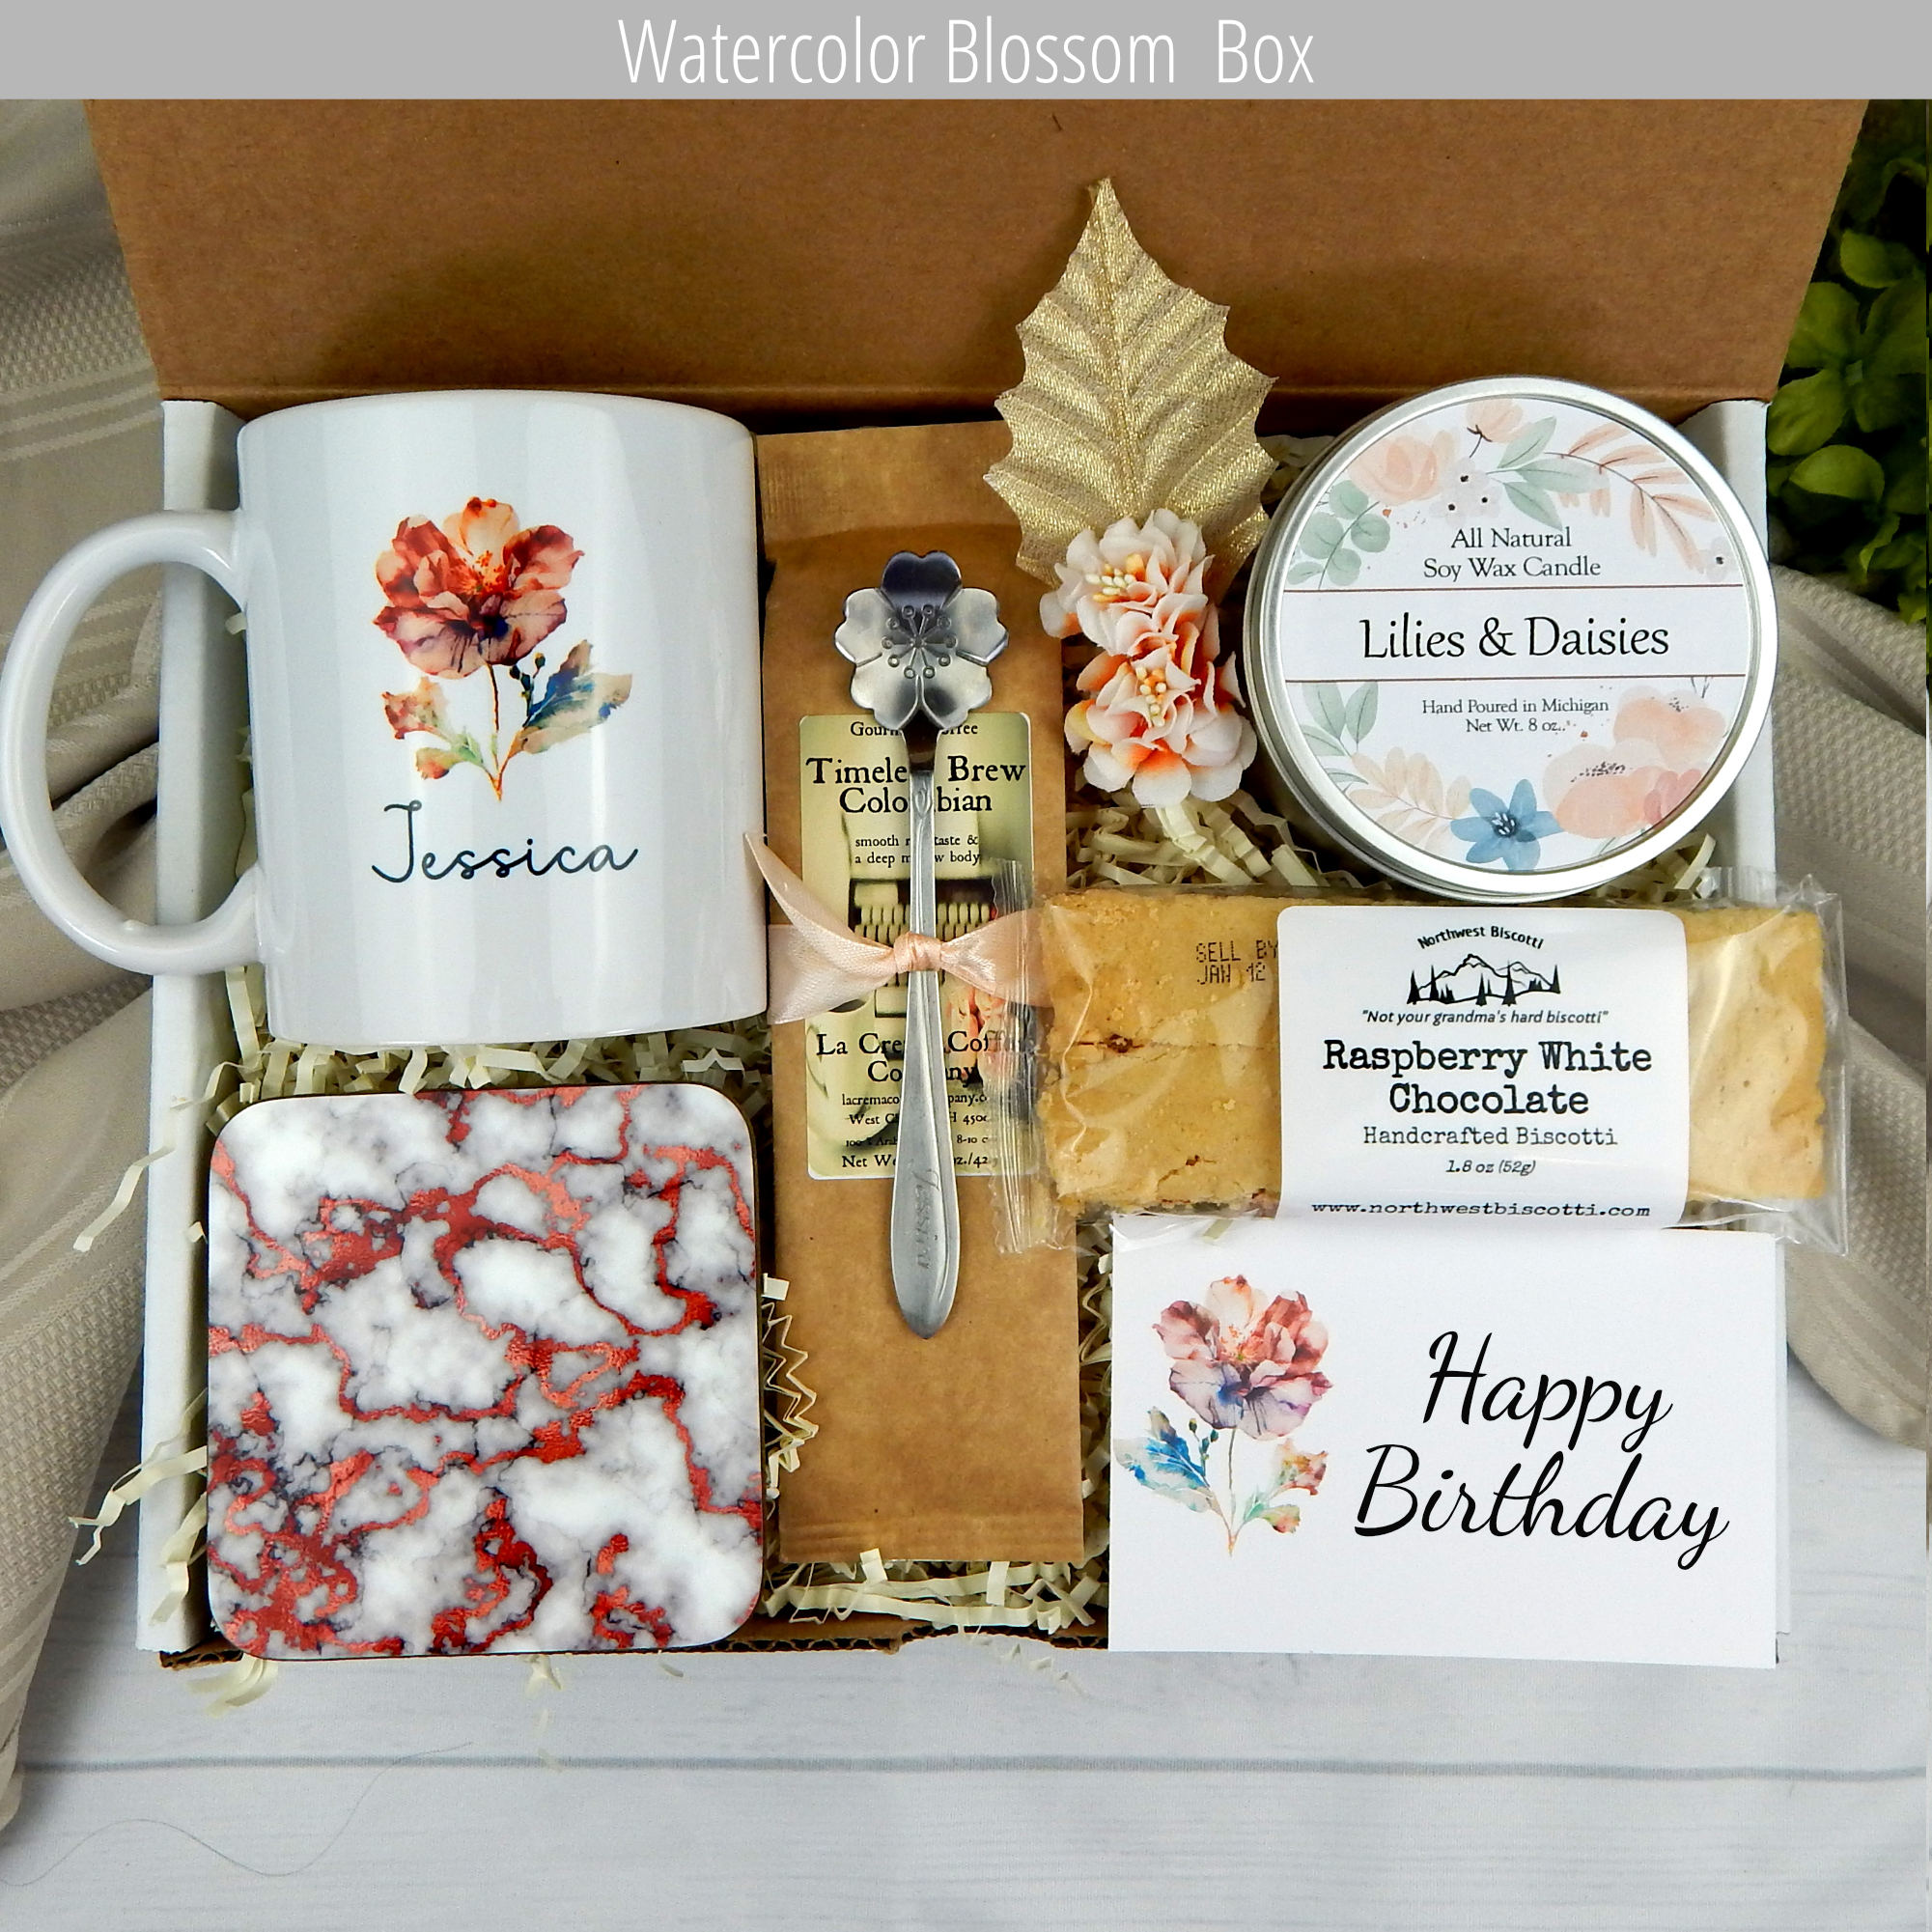 Birthday Hampers and Gift Baskets | Free UK Delivery | hampers.com